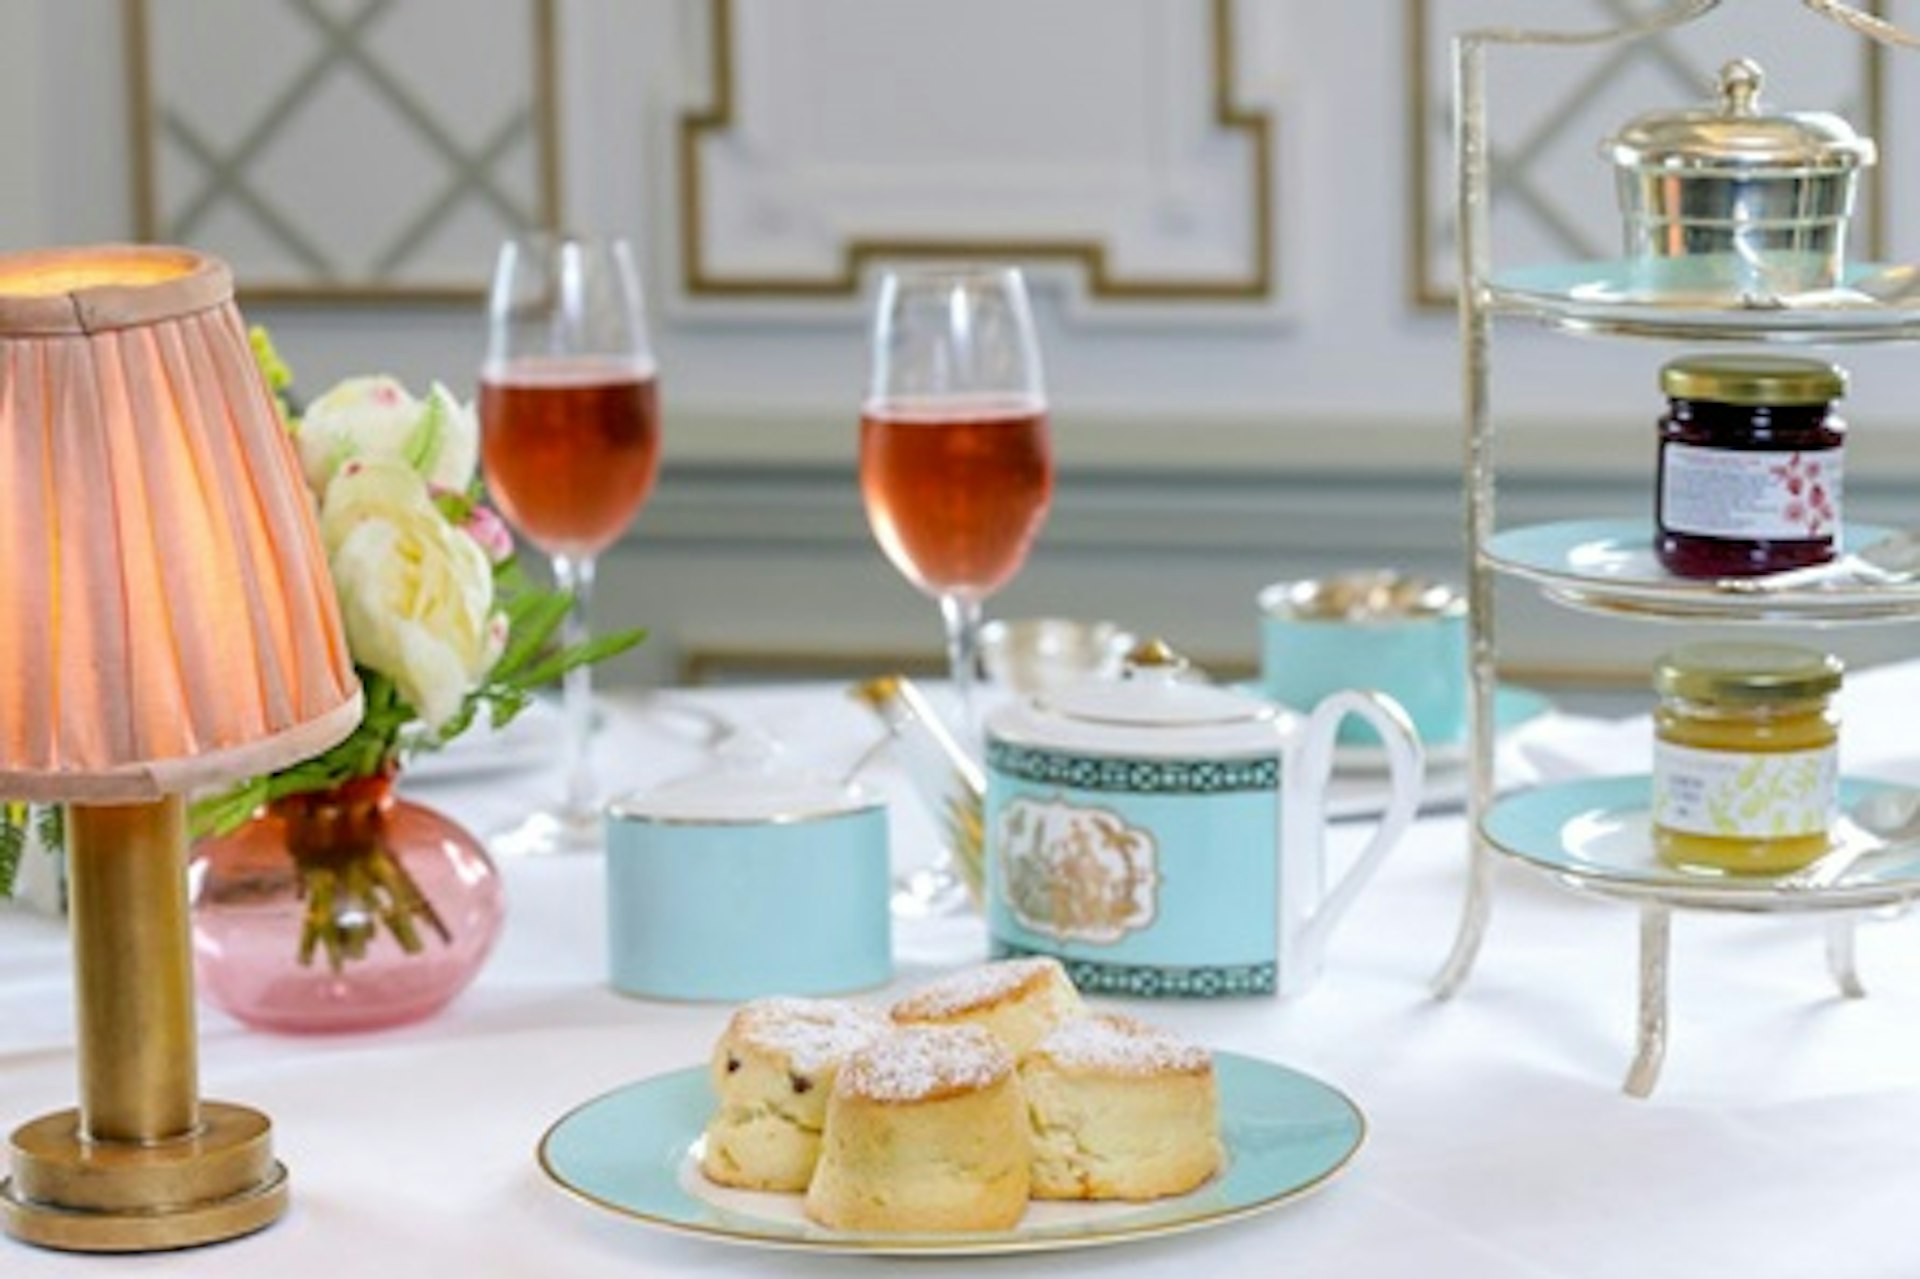 Fortnum & Mason Champagne Afternoon Tea for Two in The Diamond Jubilee Tea Salon 3